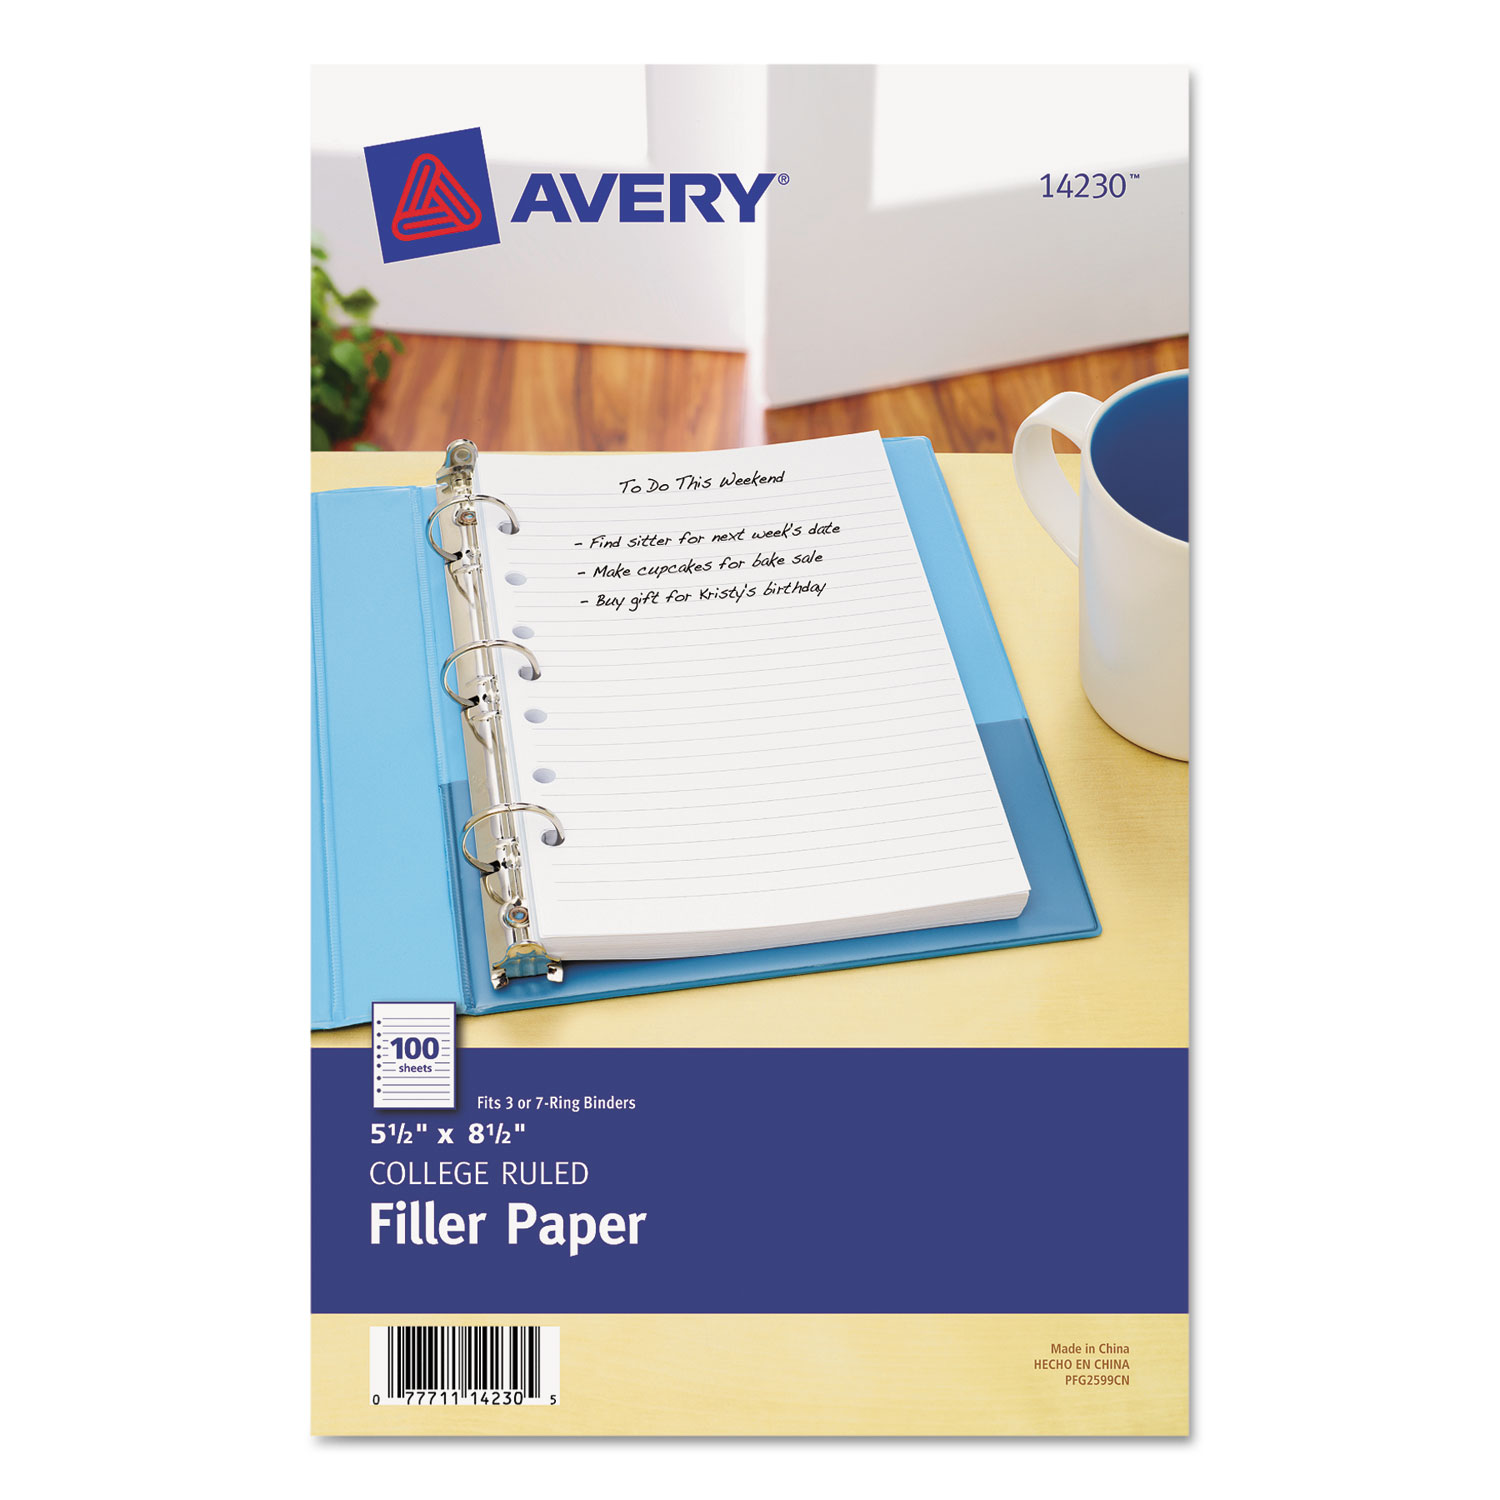 Avery Dennison Ave-05806 Economy View Round Ring Reference Binder for sale online 